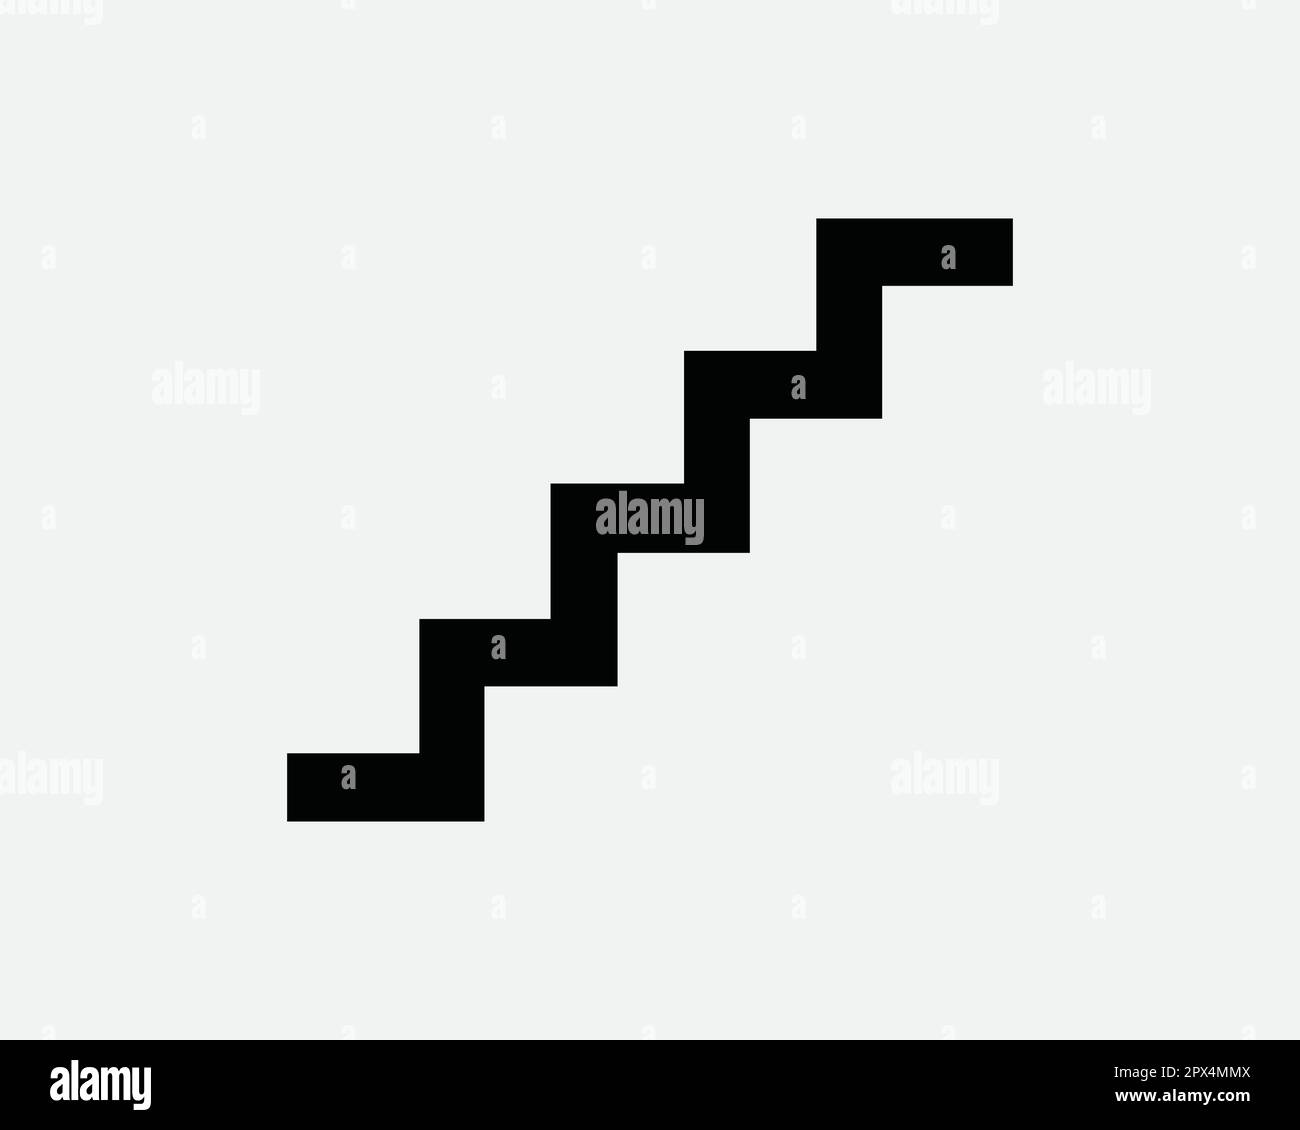 Stairs Icon Sign Symbol. Staircase Step Ladder Stairway Stairwell Climb Up Down Accend Decend Walkway Path Artwork Graphic Illustration Clipart Vector Stock Vector